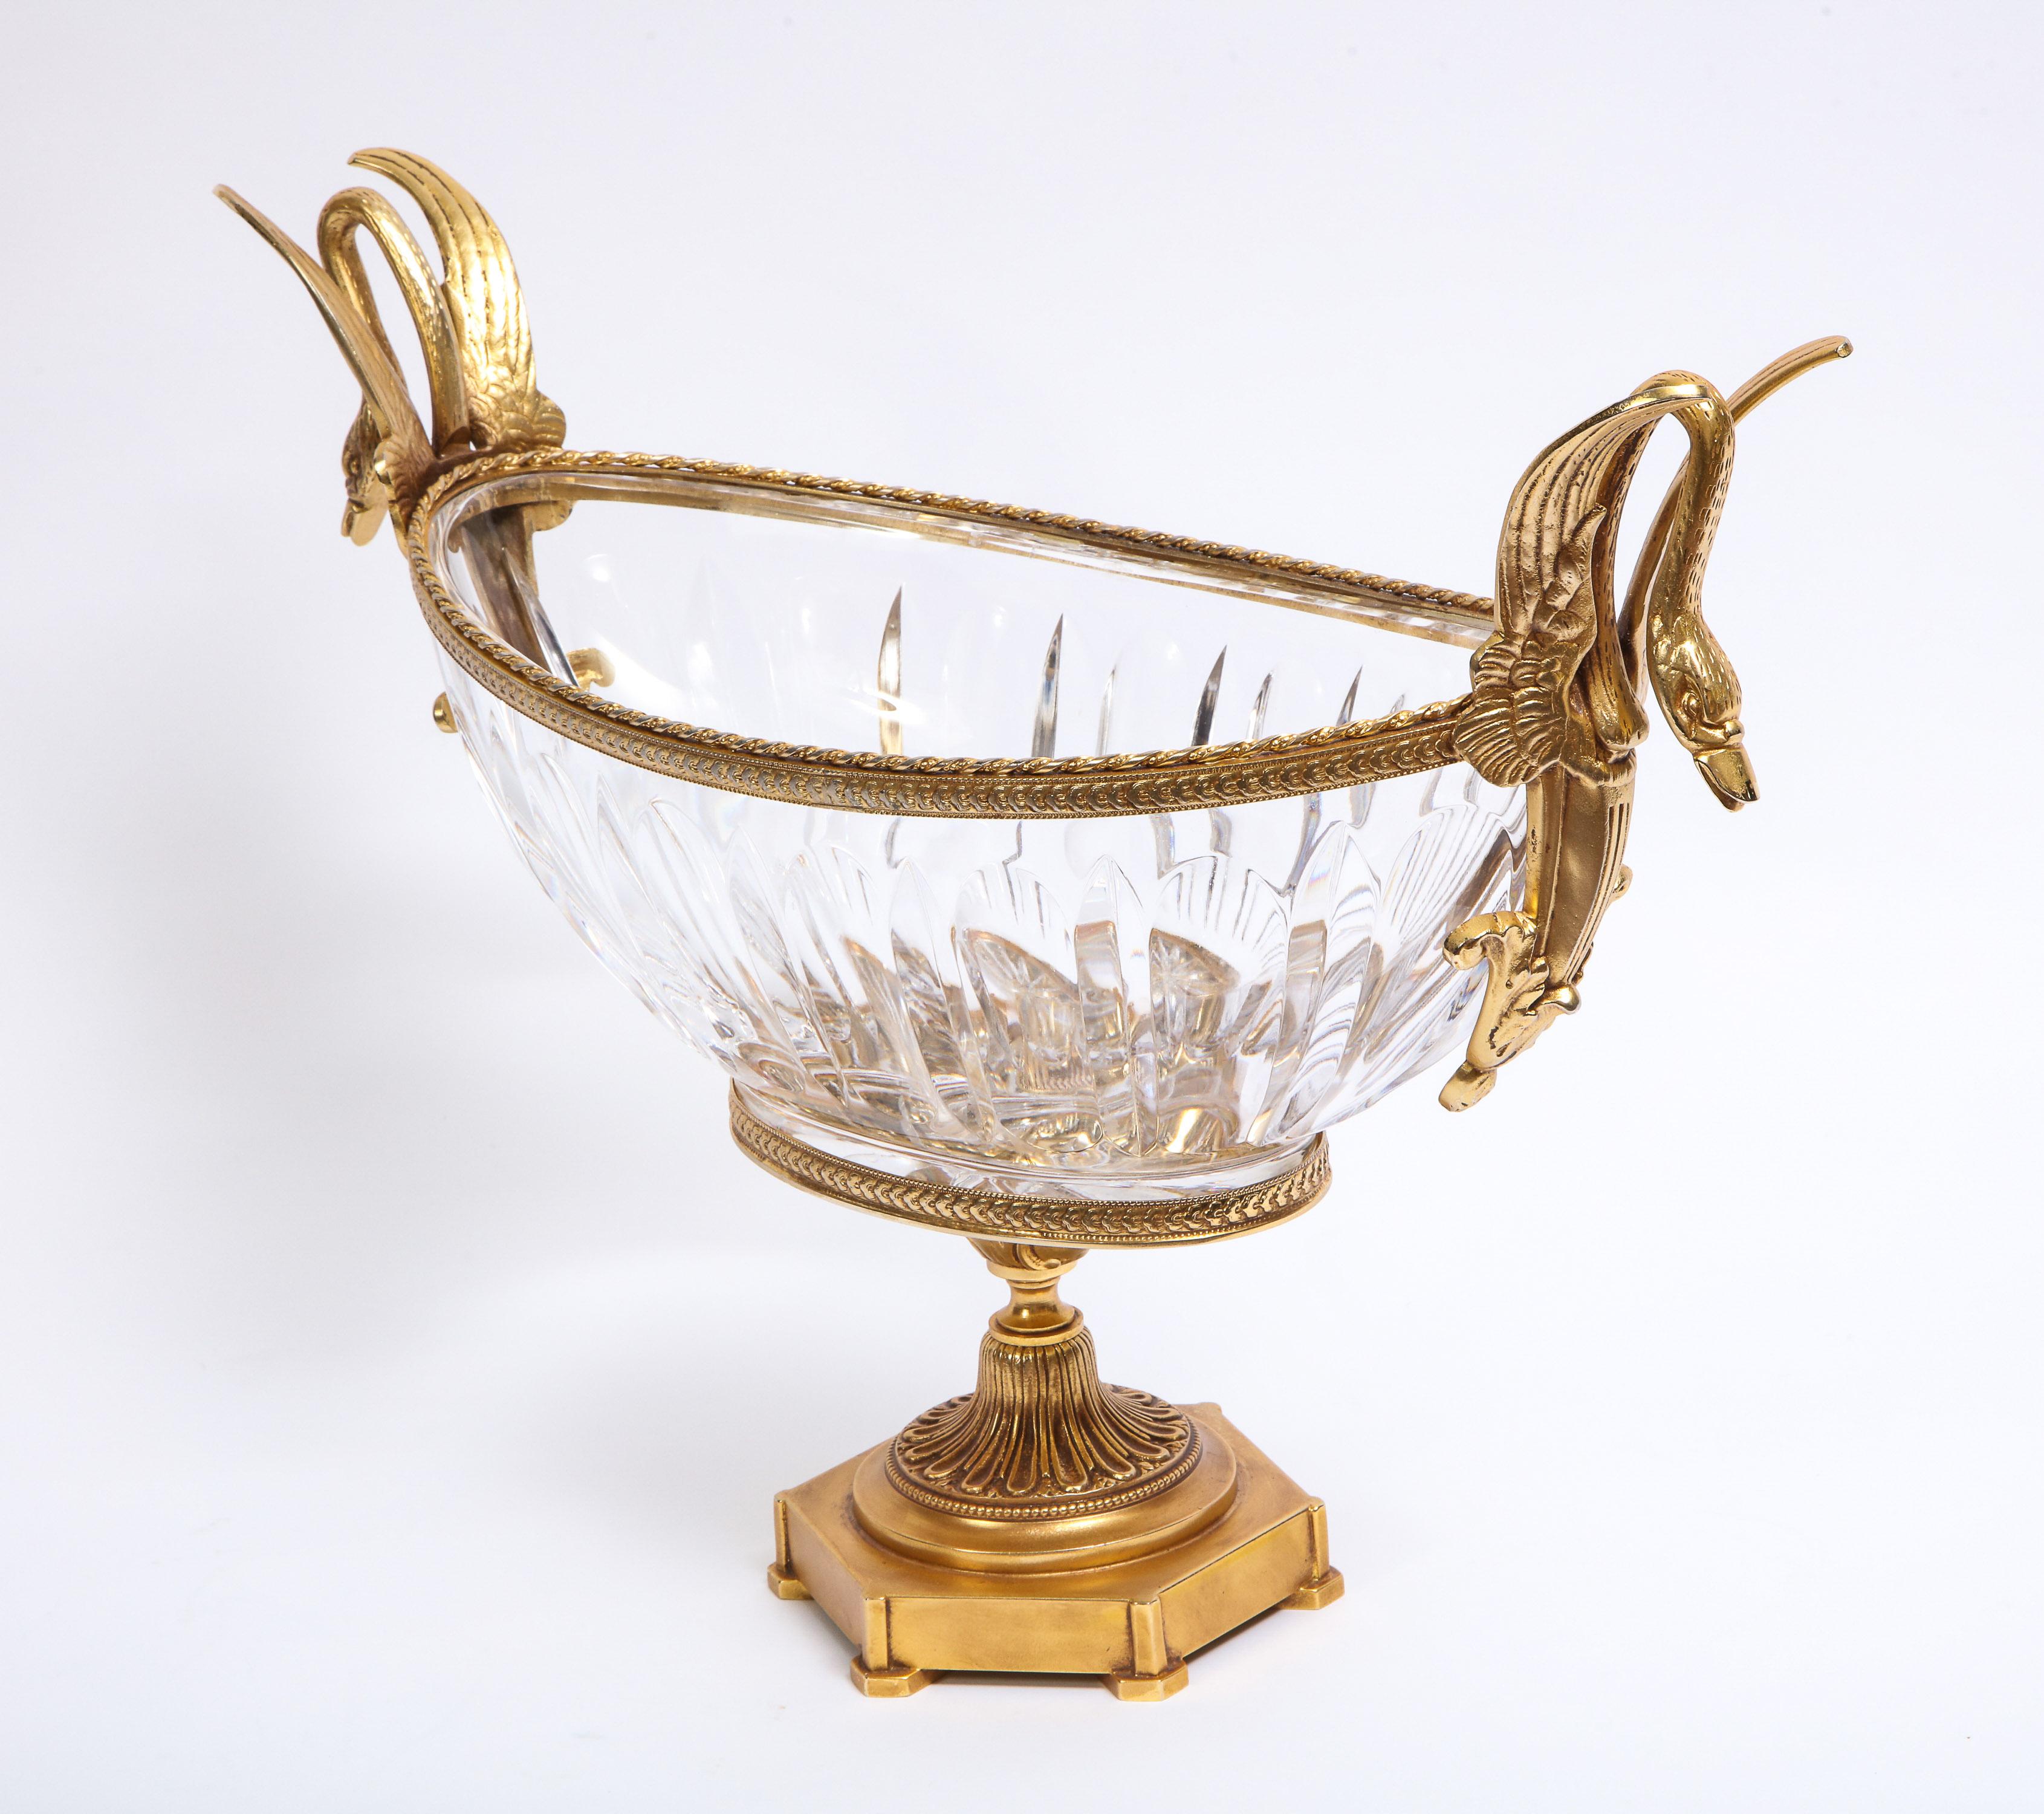 French 19th Century, Gilt Bronze Mounted Crystal Centerpiece Attributed to Baccarat For Sale